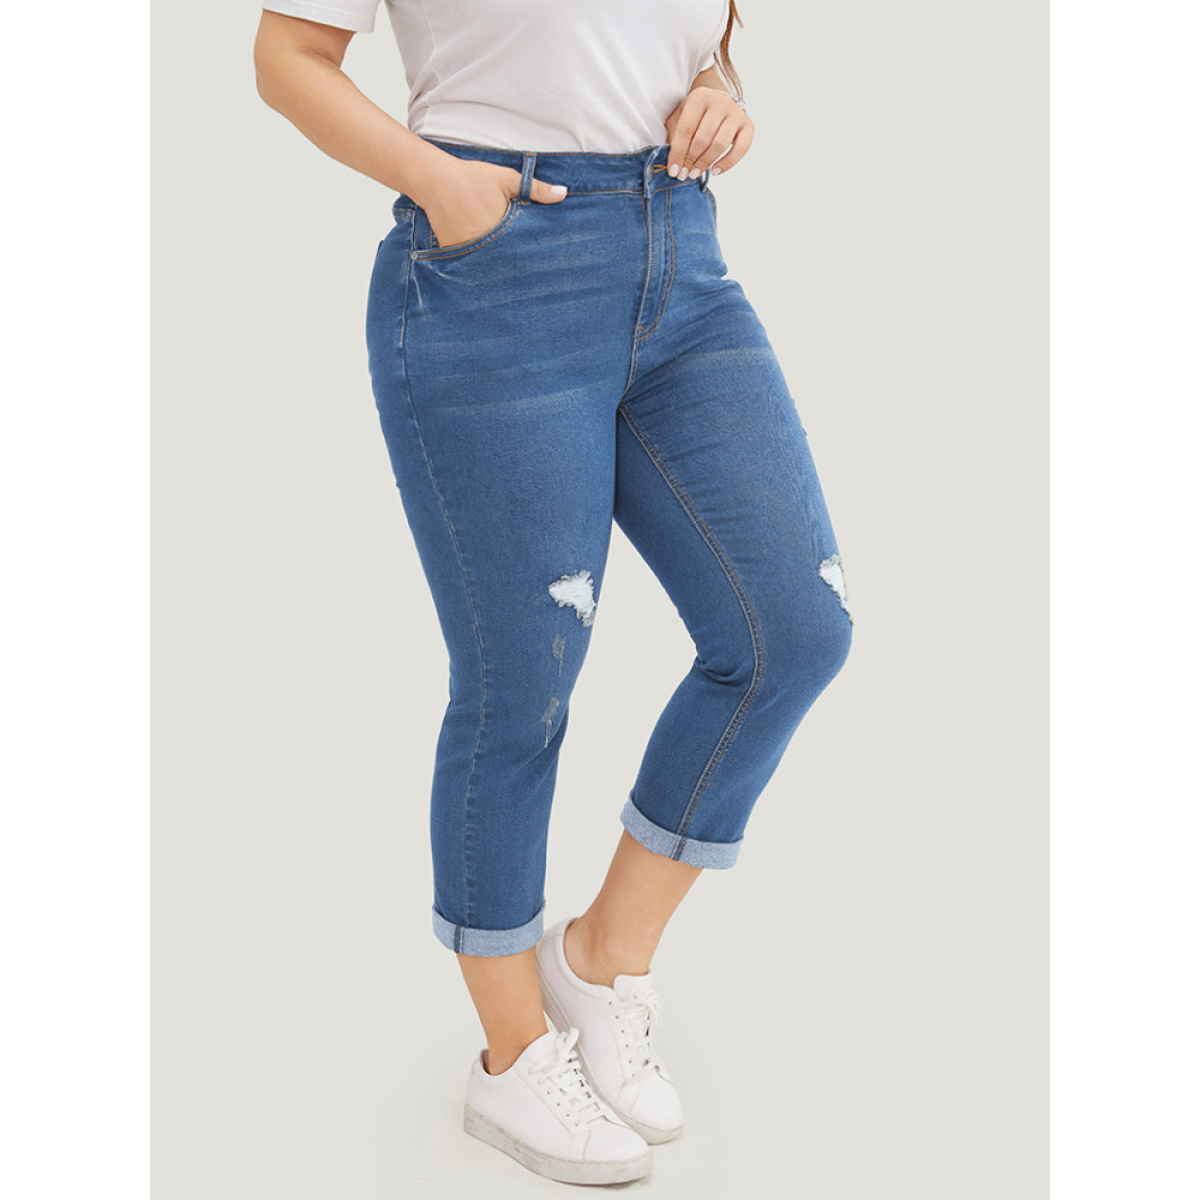 

Plus Size Very Stretchy Dark Wash Roll Hem Cropped Jeans Women Blue Casual Plain Distressed High stretch Patch pocket Jeans BloomChic